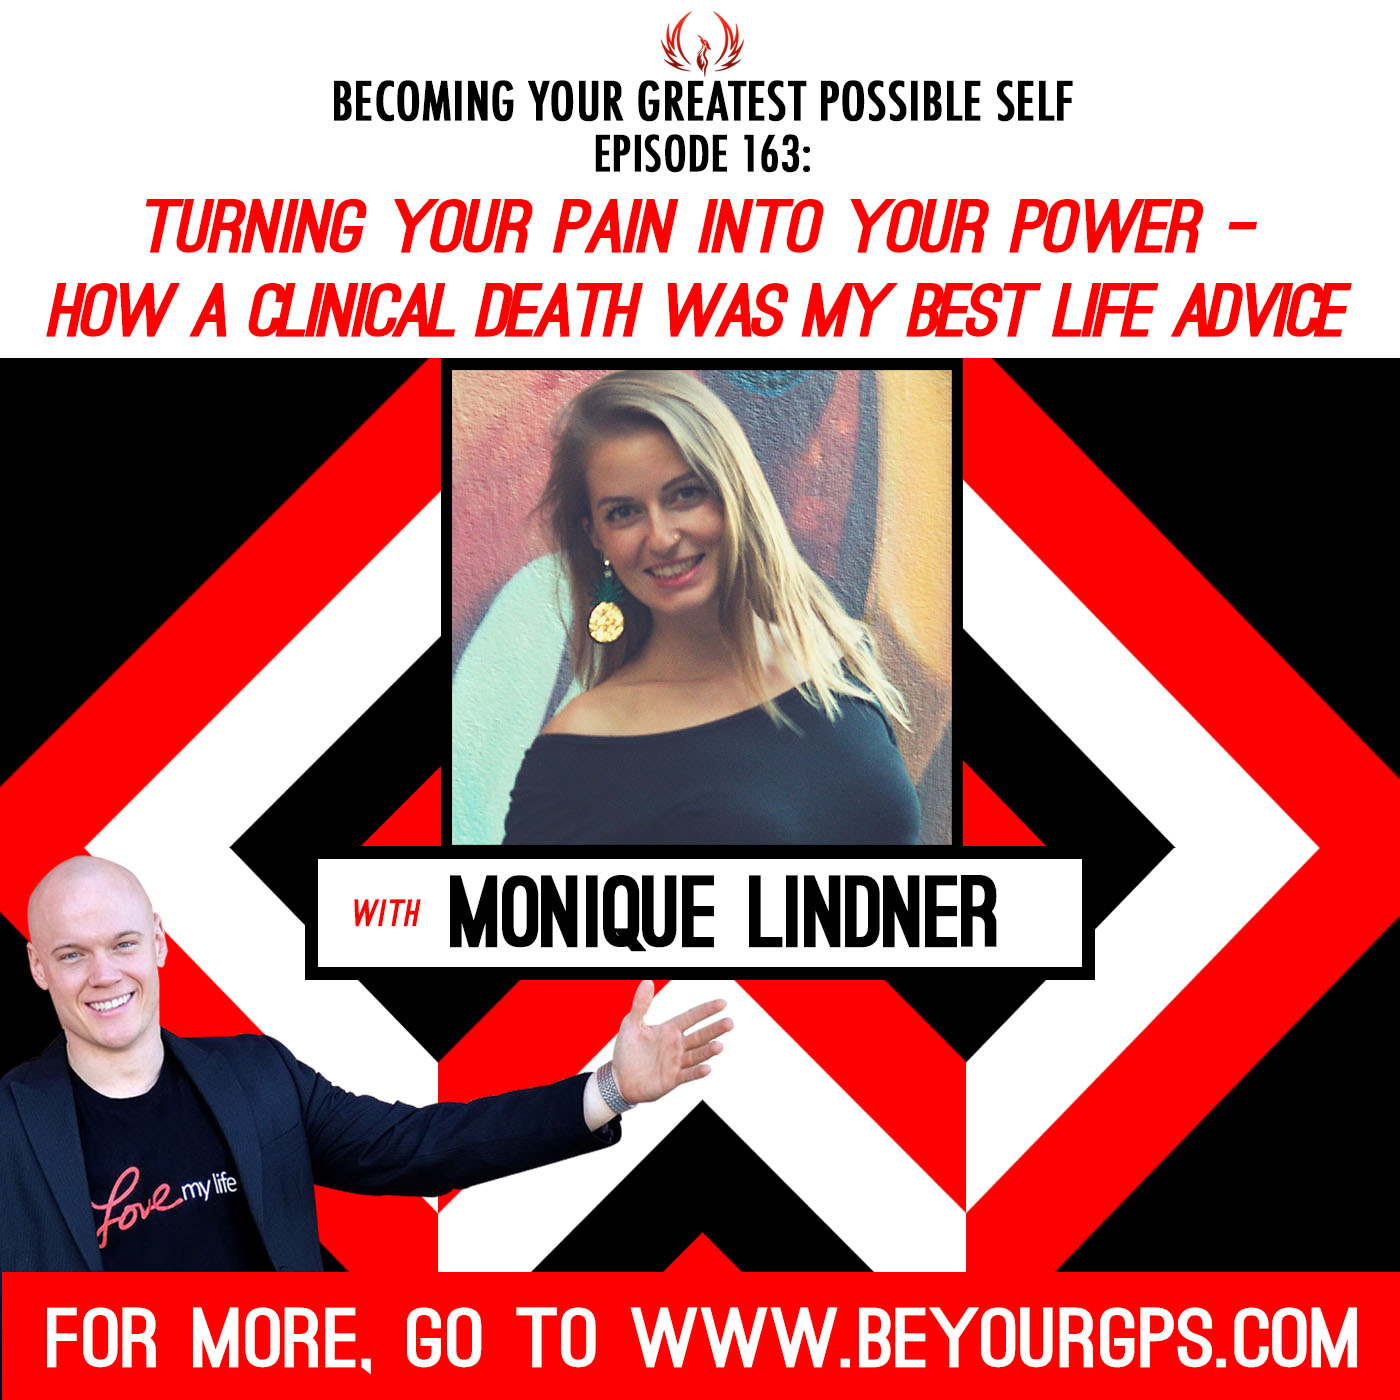 Turning Your Pain into Your Power - How a Clinical Death was My Best Life Advice with Monique Lindner